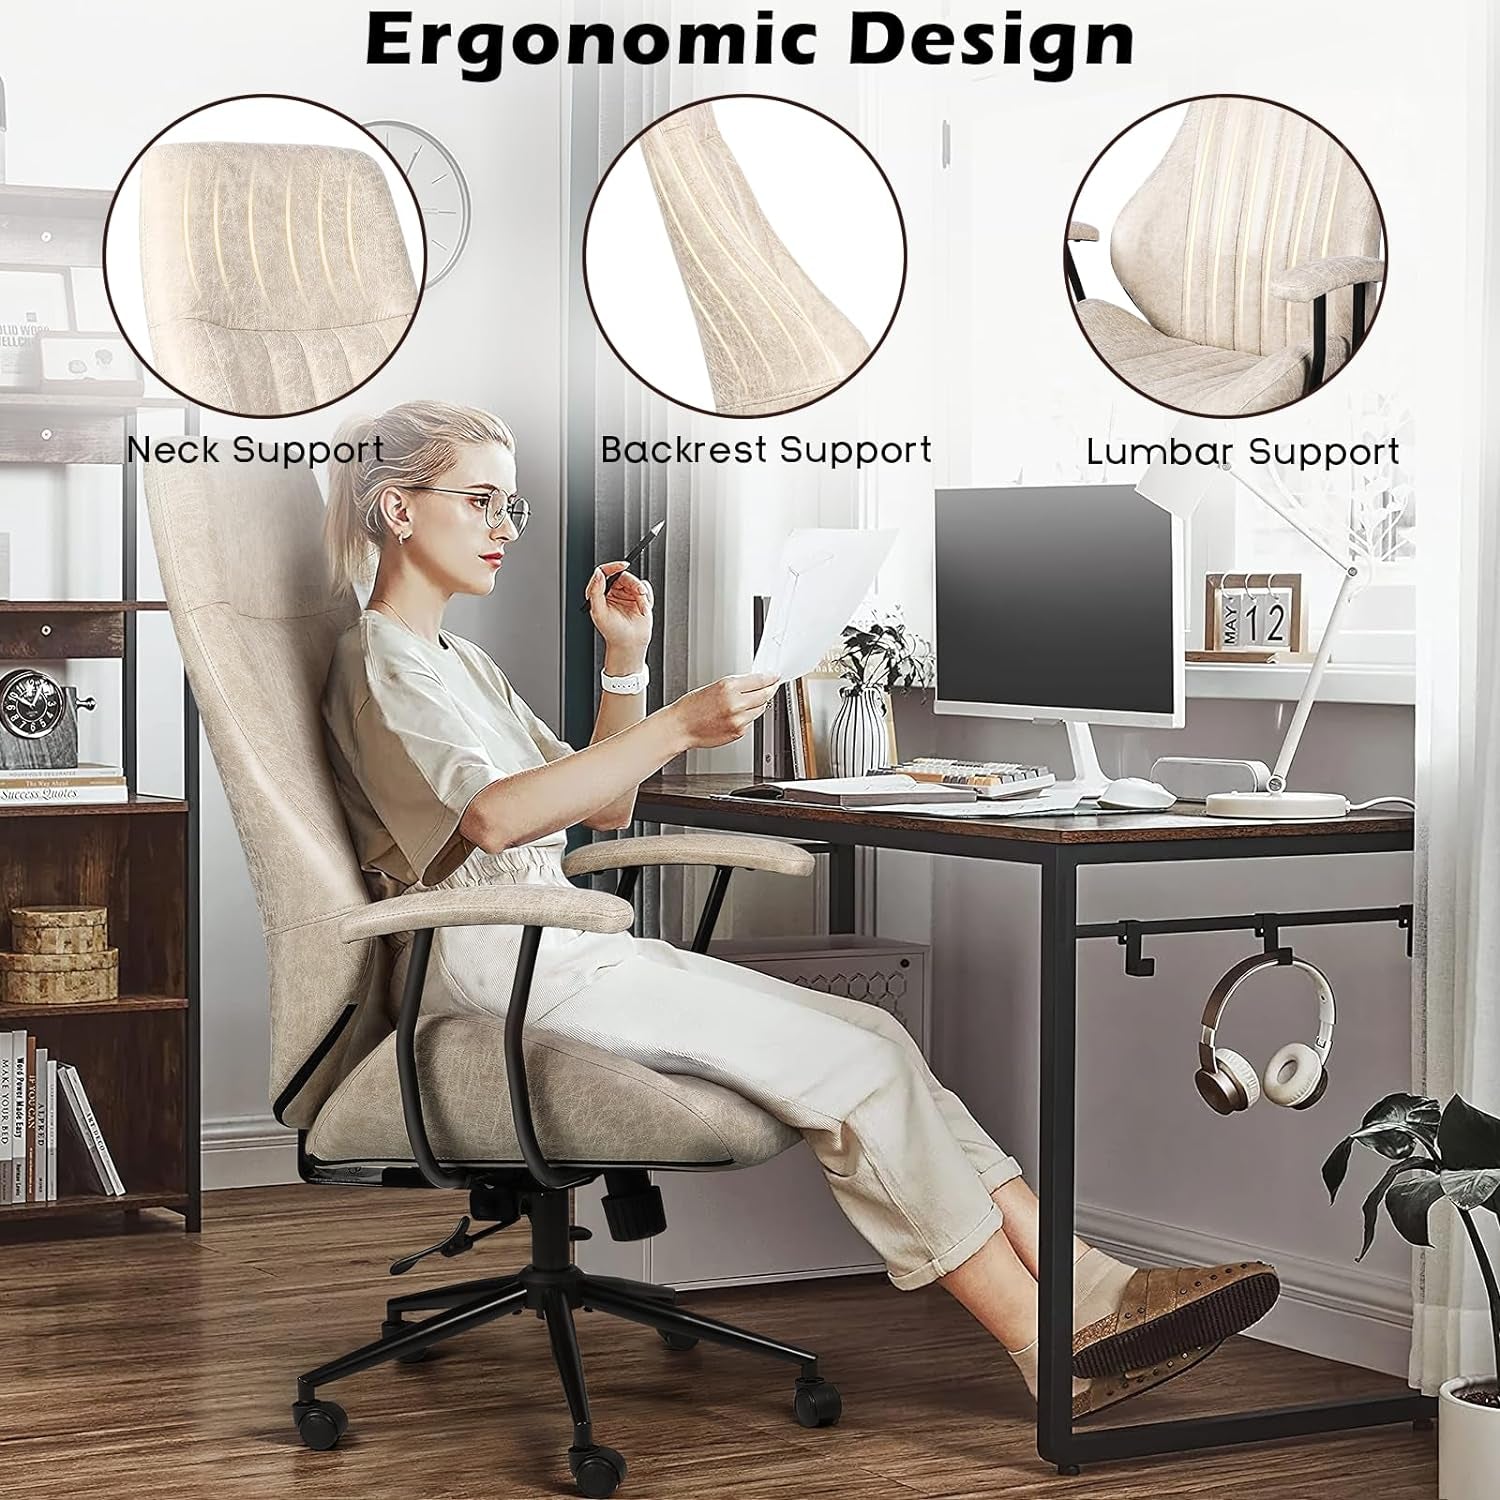 Leather Office Chair,Computer Chair,Computer Desk Chair,Morden Ergonomic Desk Chair,High Back Desk Chair,Height Adjustable Suede Fabric Executive Chair with Padded Armrest (Beige)